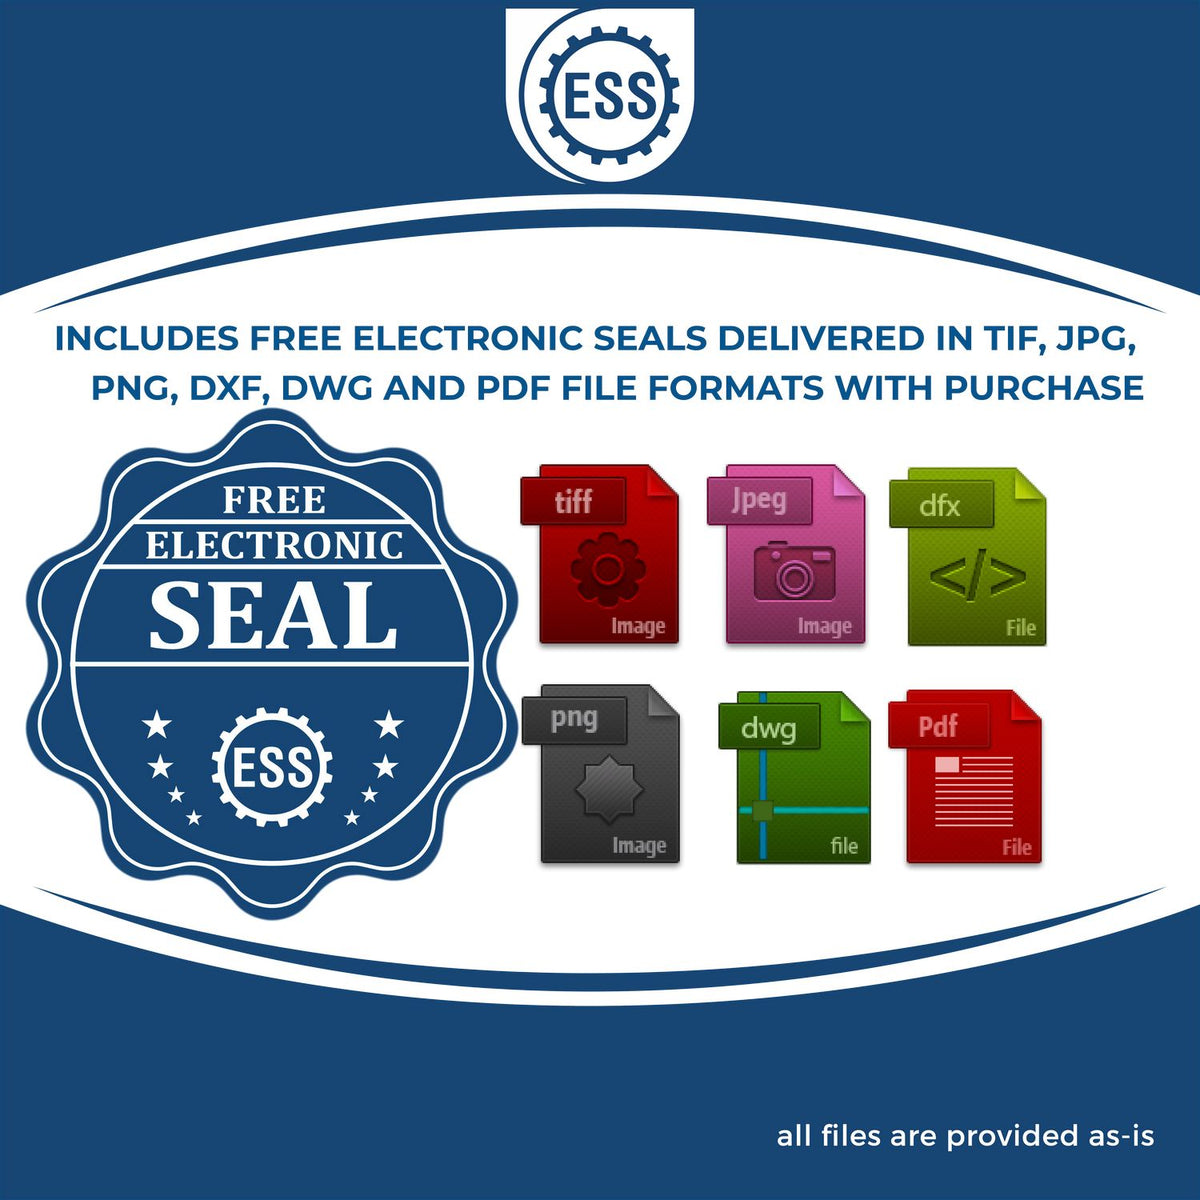 An infographic for the free electronic seal for the Gift Nebraska Architect Seal illustrating the different file type icons such as DXF, DWG, TIF, JPG and PNG.